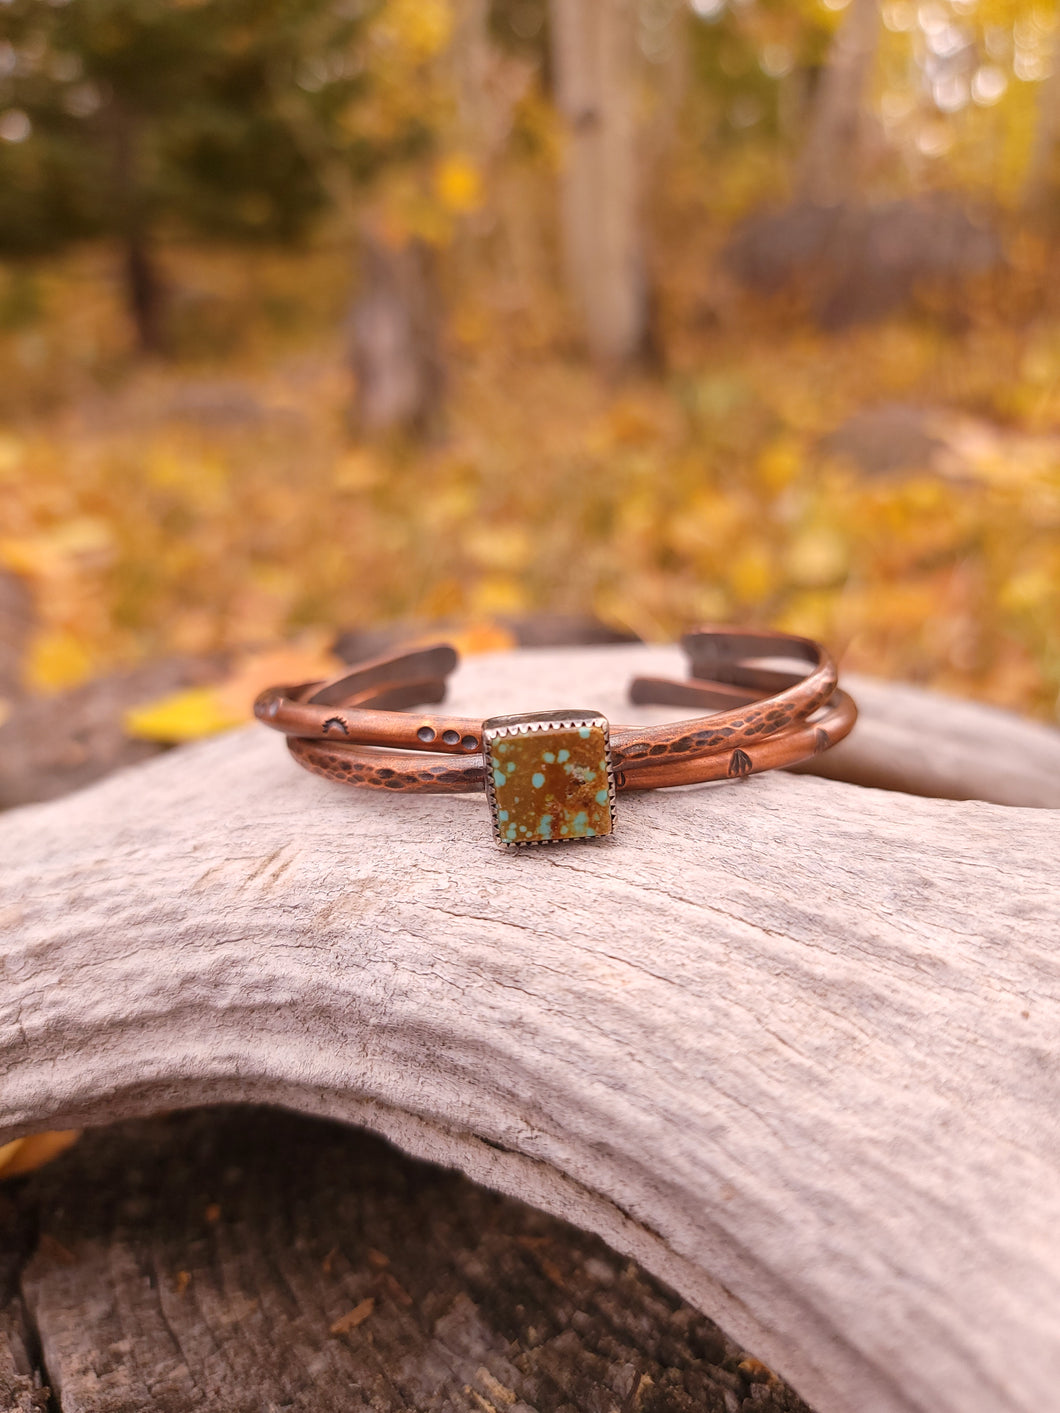 Patagonia Copper and Turquoise Bracelet Set